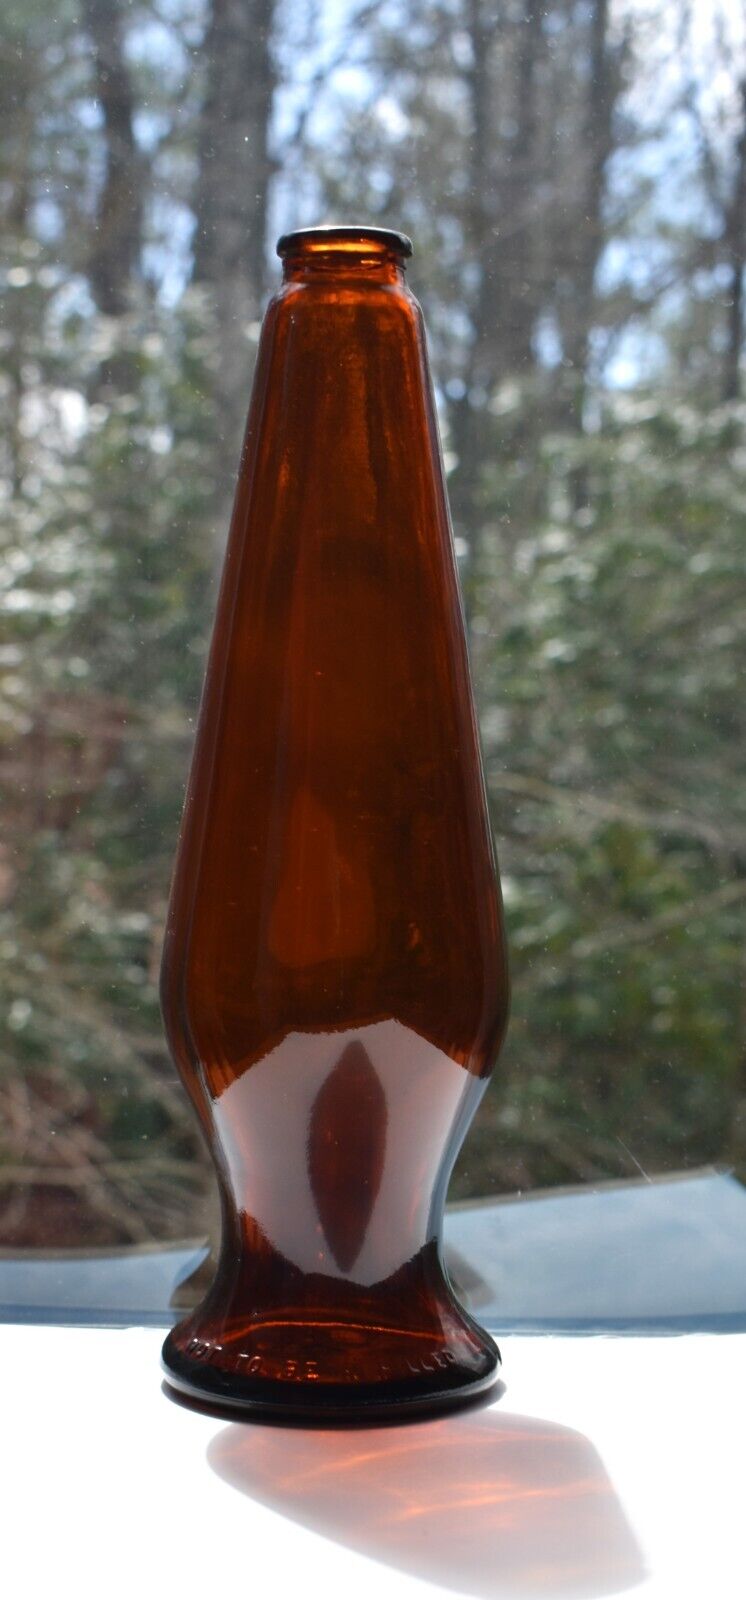 VINTAGE 1960S MICHELOB AMBER BROWN FOOTED BEER BOTTLE EMPTY ANTIQUE COLLECTIBLE